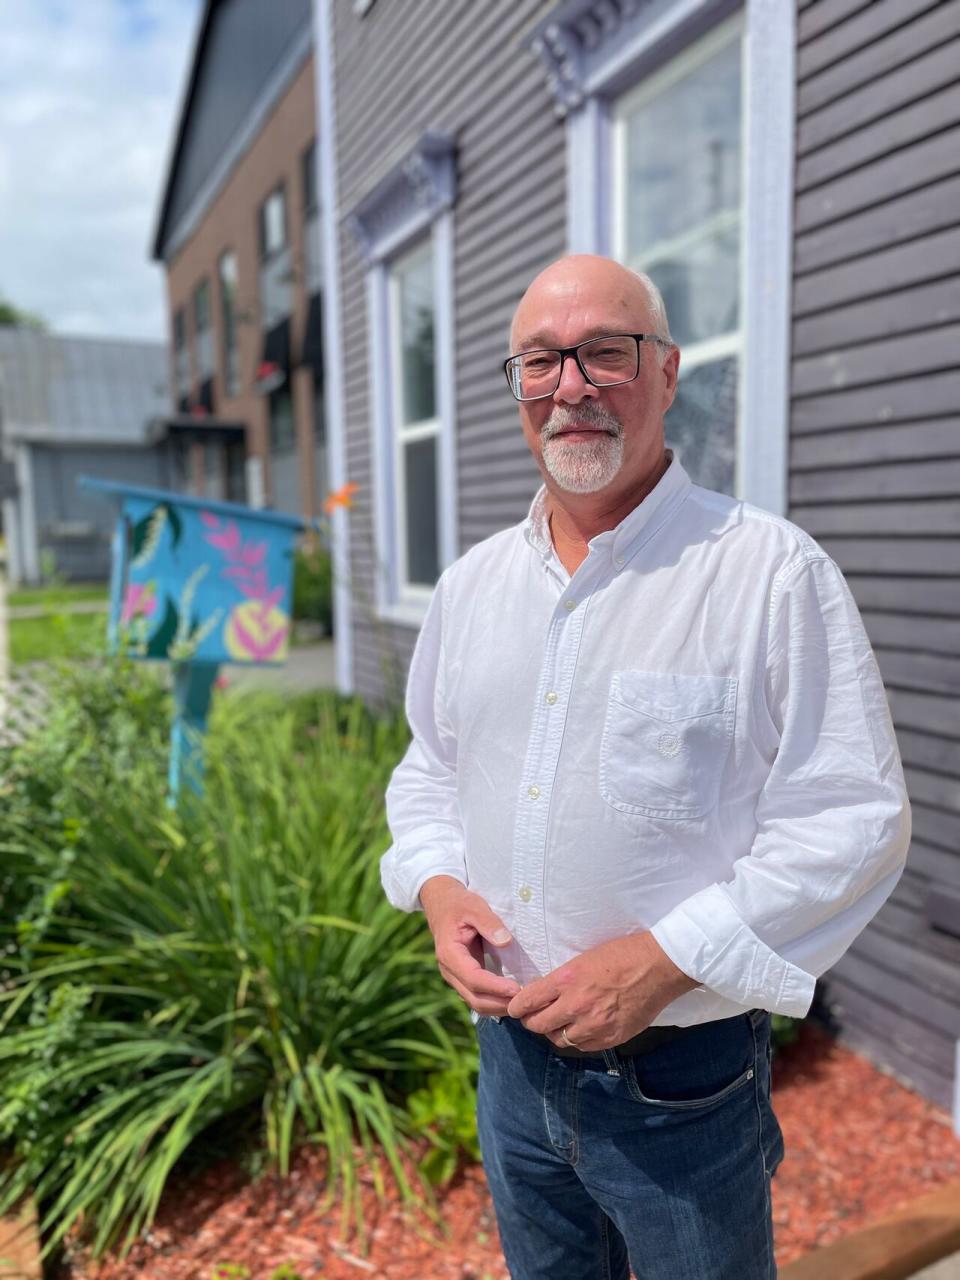 Warren Maddox, executive director of the Fredericton Homeless Shelters, says the City of Fredericton could do more to remove red tape, like waiving development fees and property taxes for non-profits operating affordable housing.